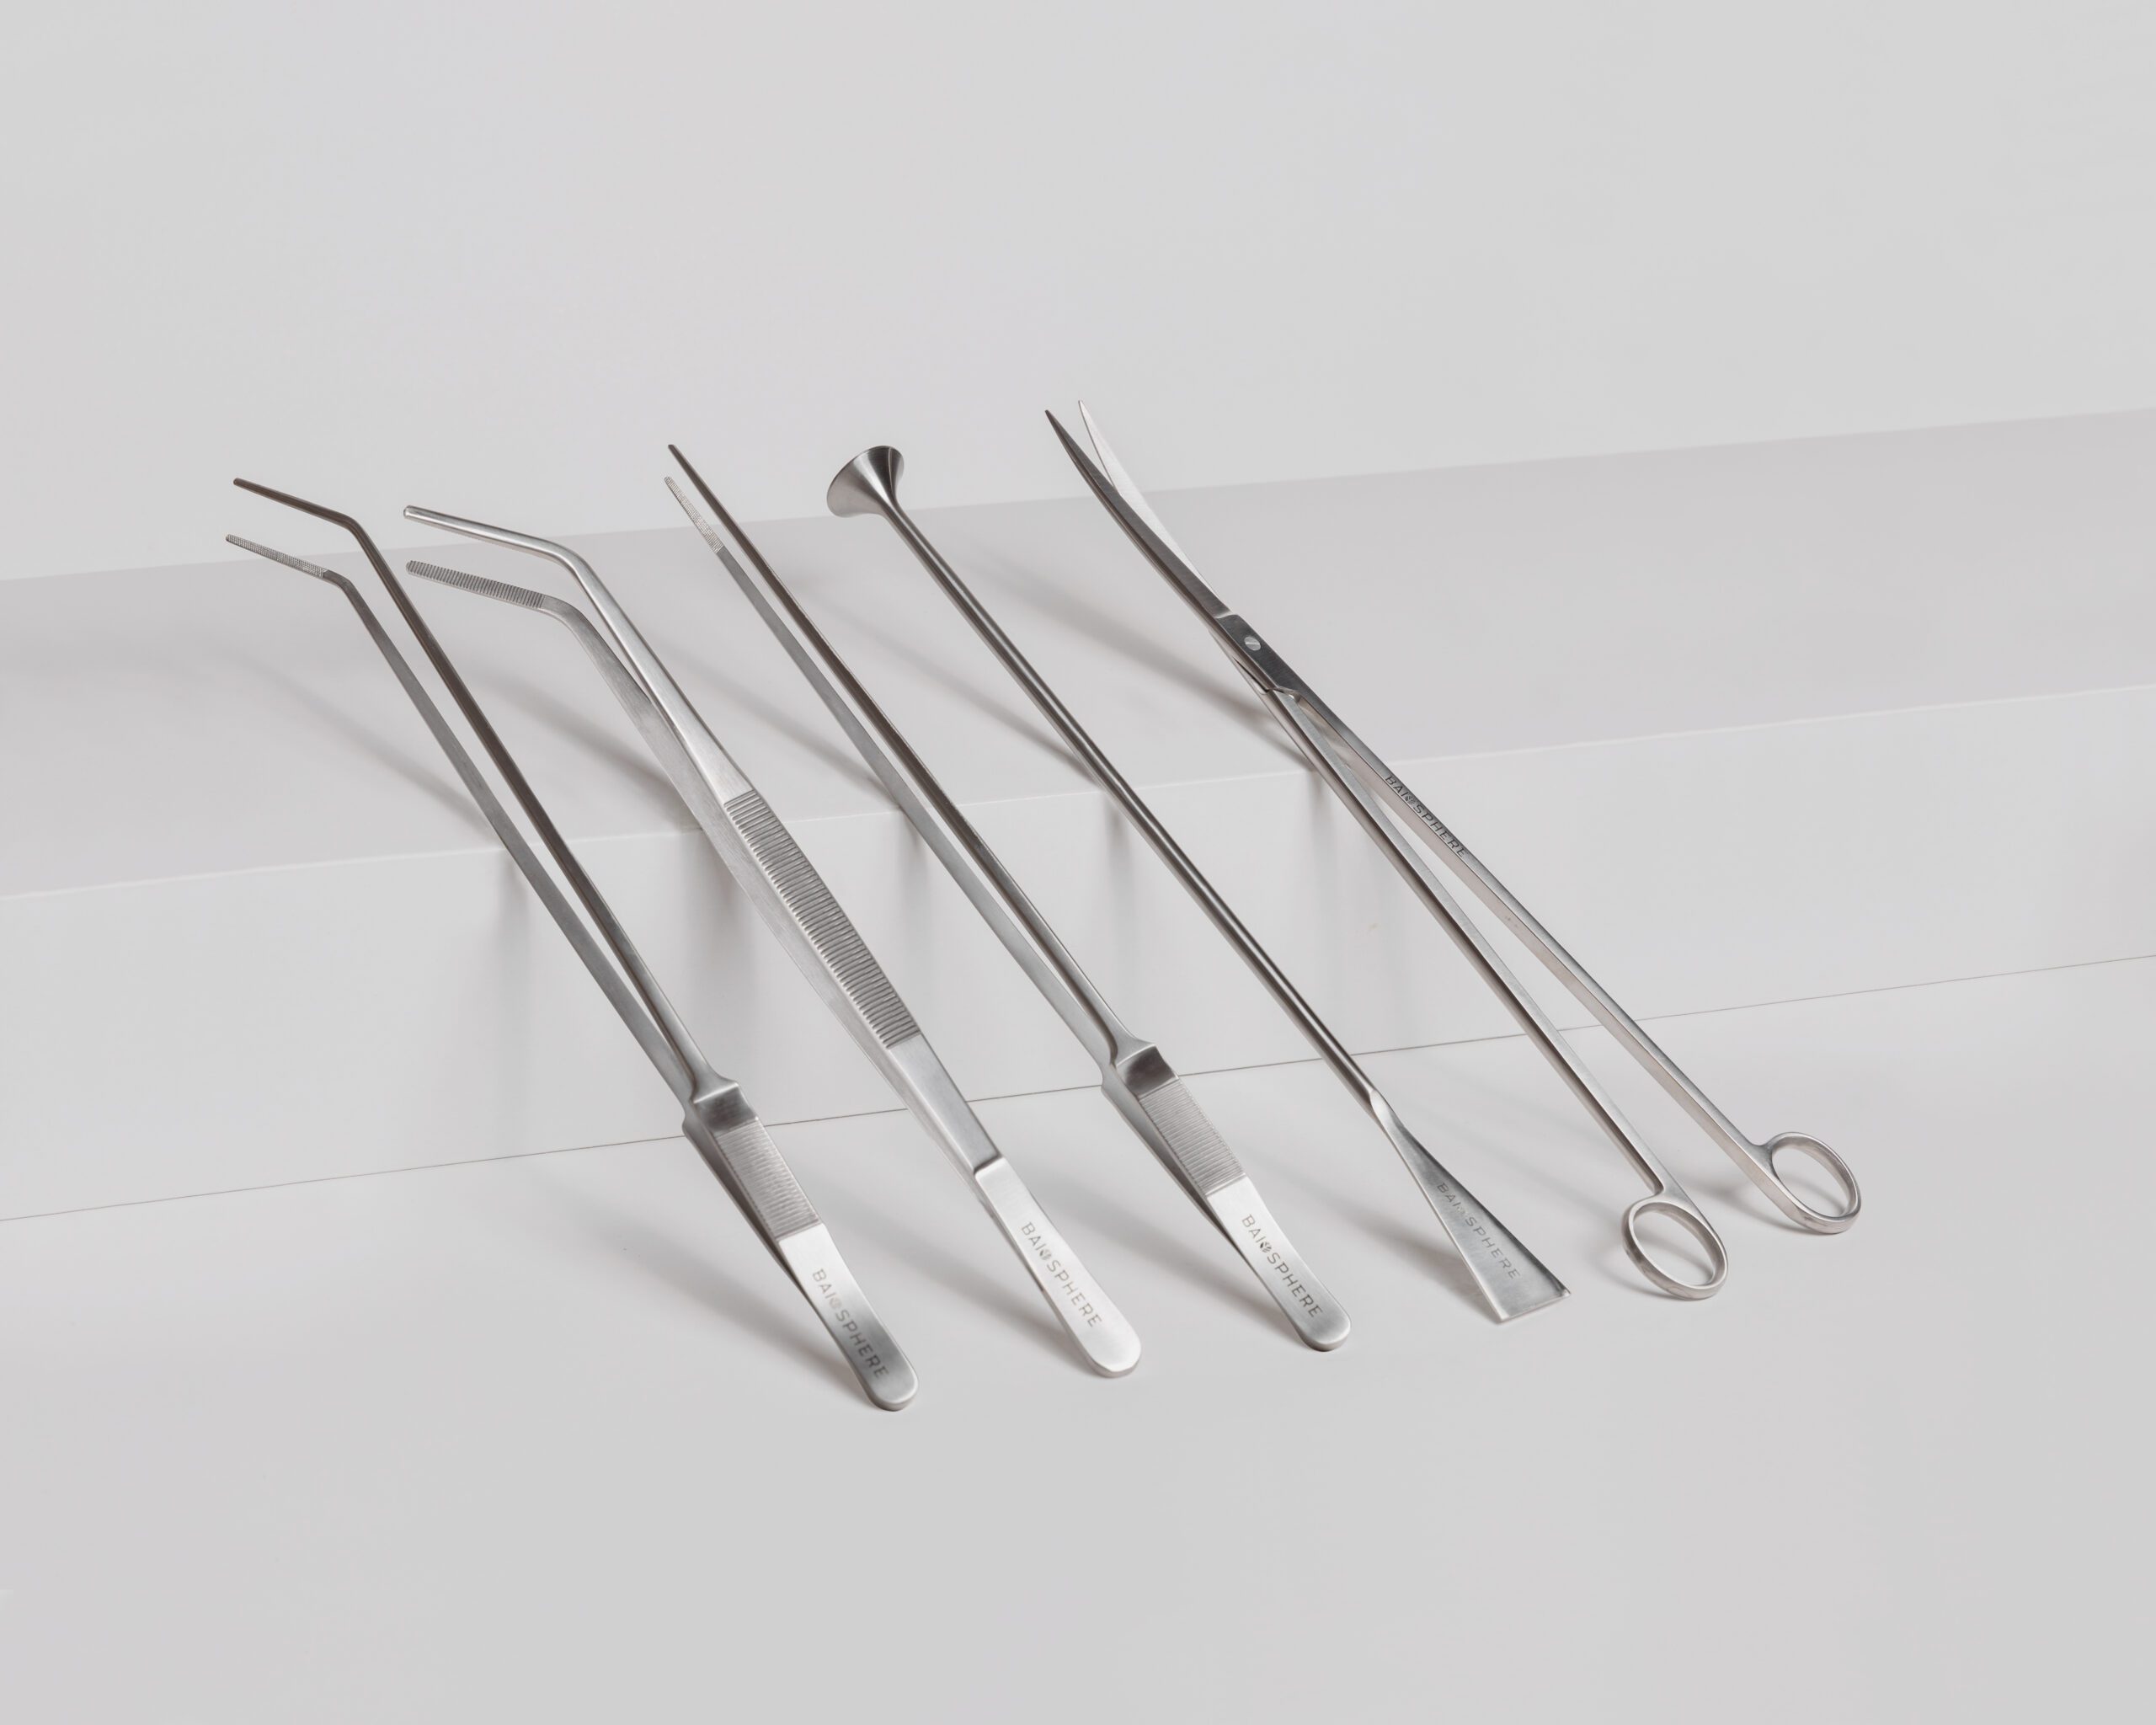 Scaping tools set in silver